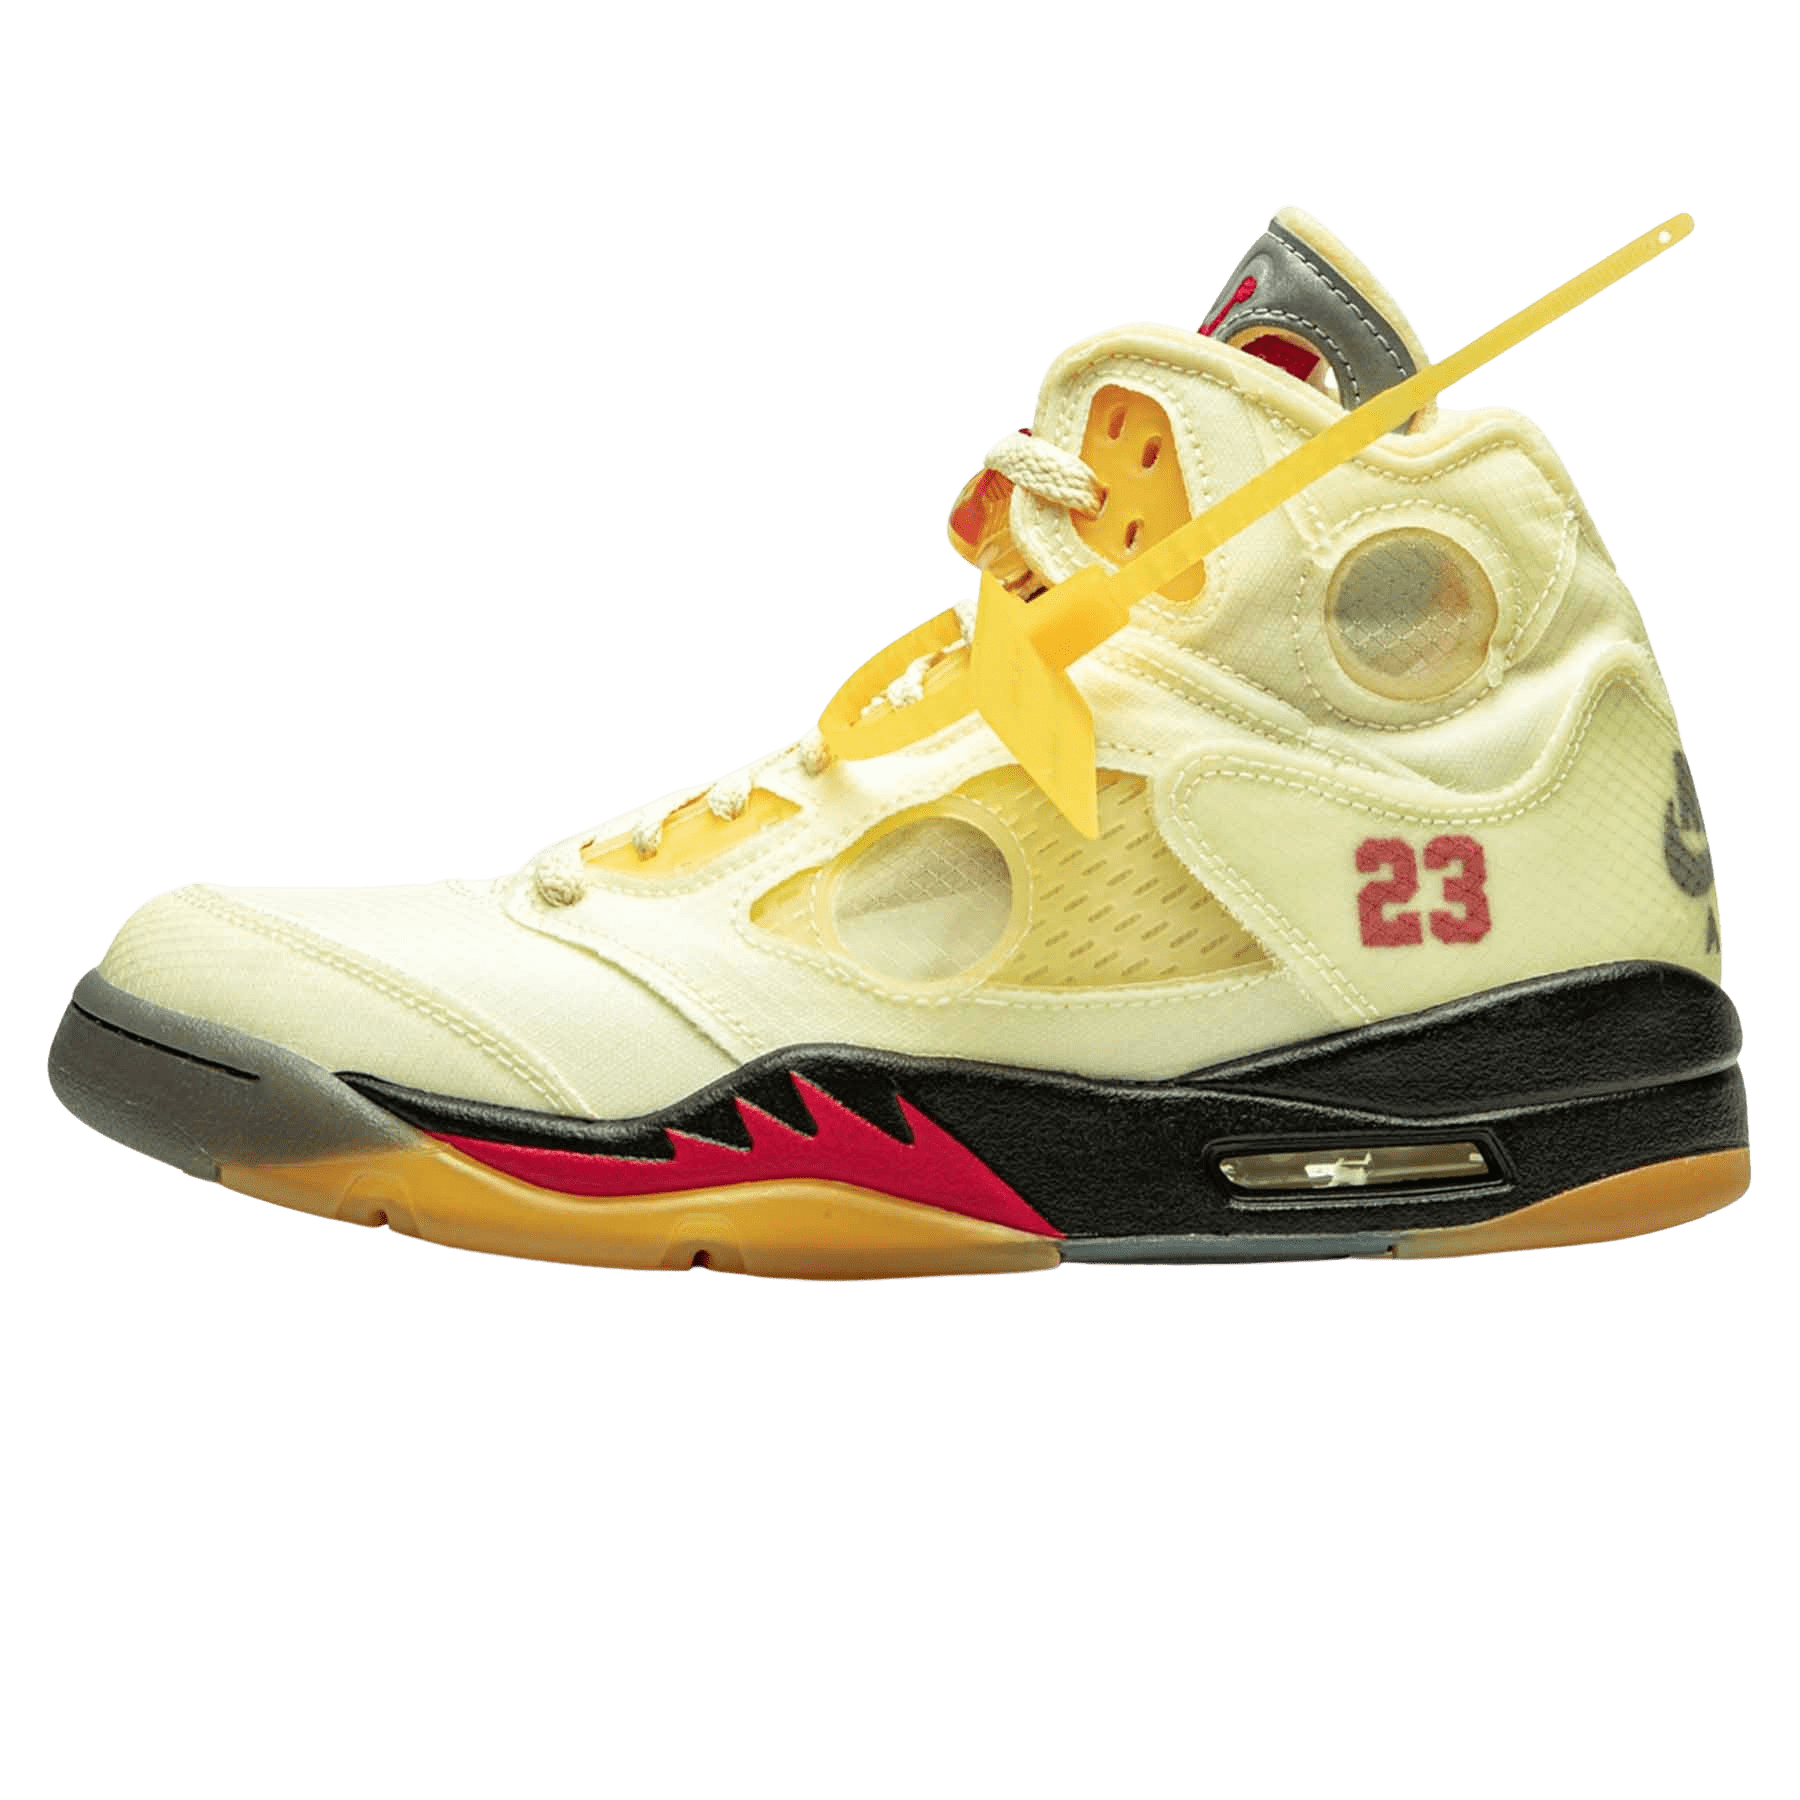 The Supreme Air Jordan 5 Sneakers Will Be Yours if You Follow These Steps